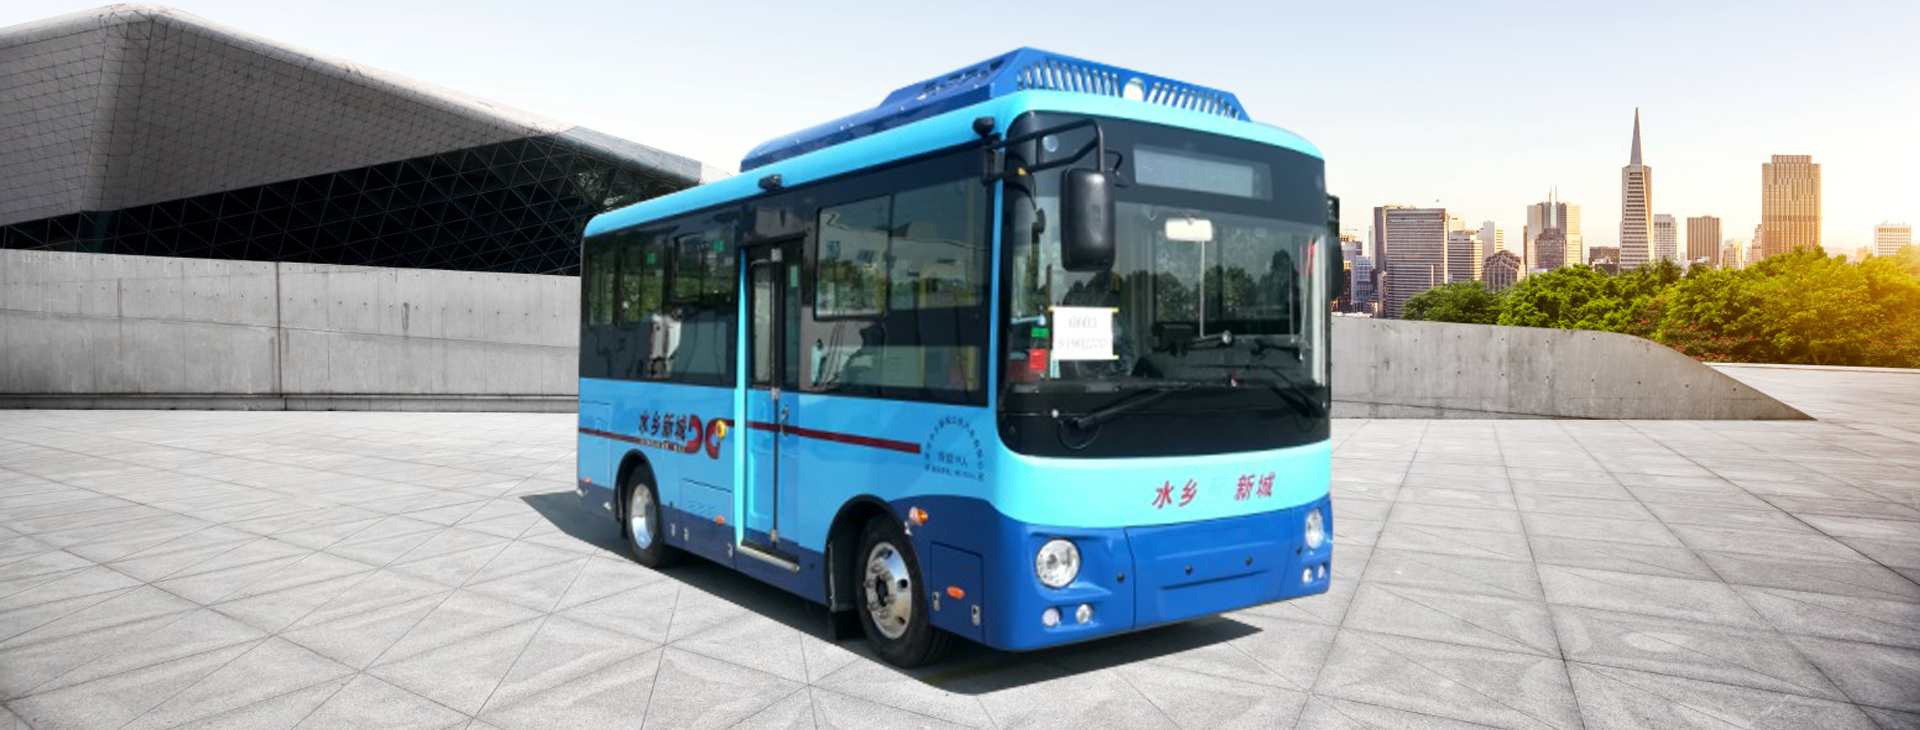 SLK6603 pure electric road bus